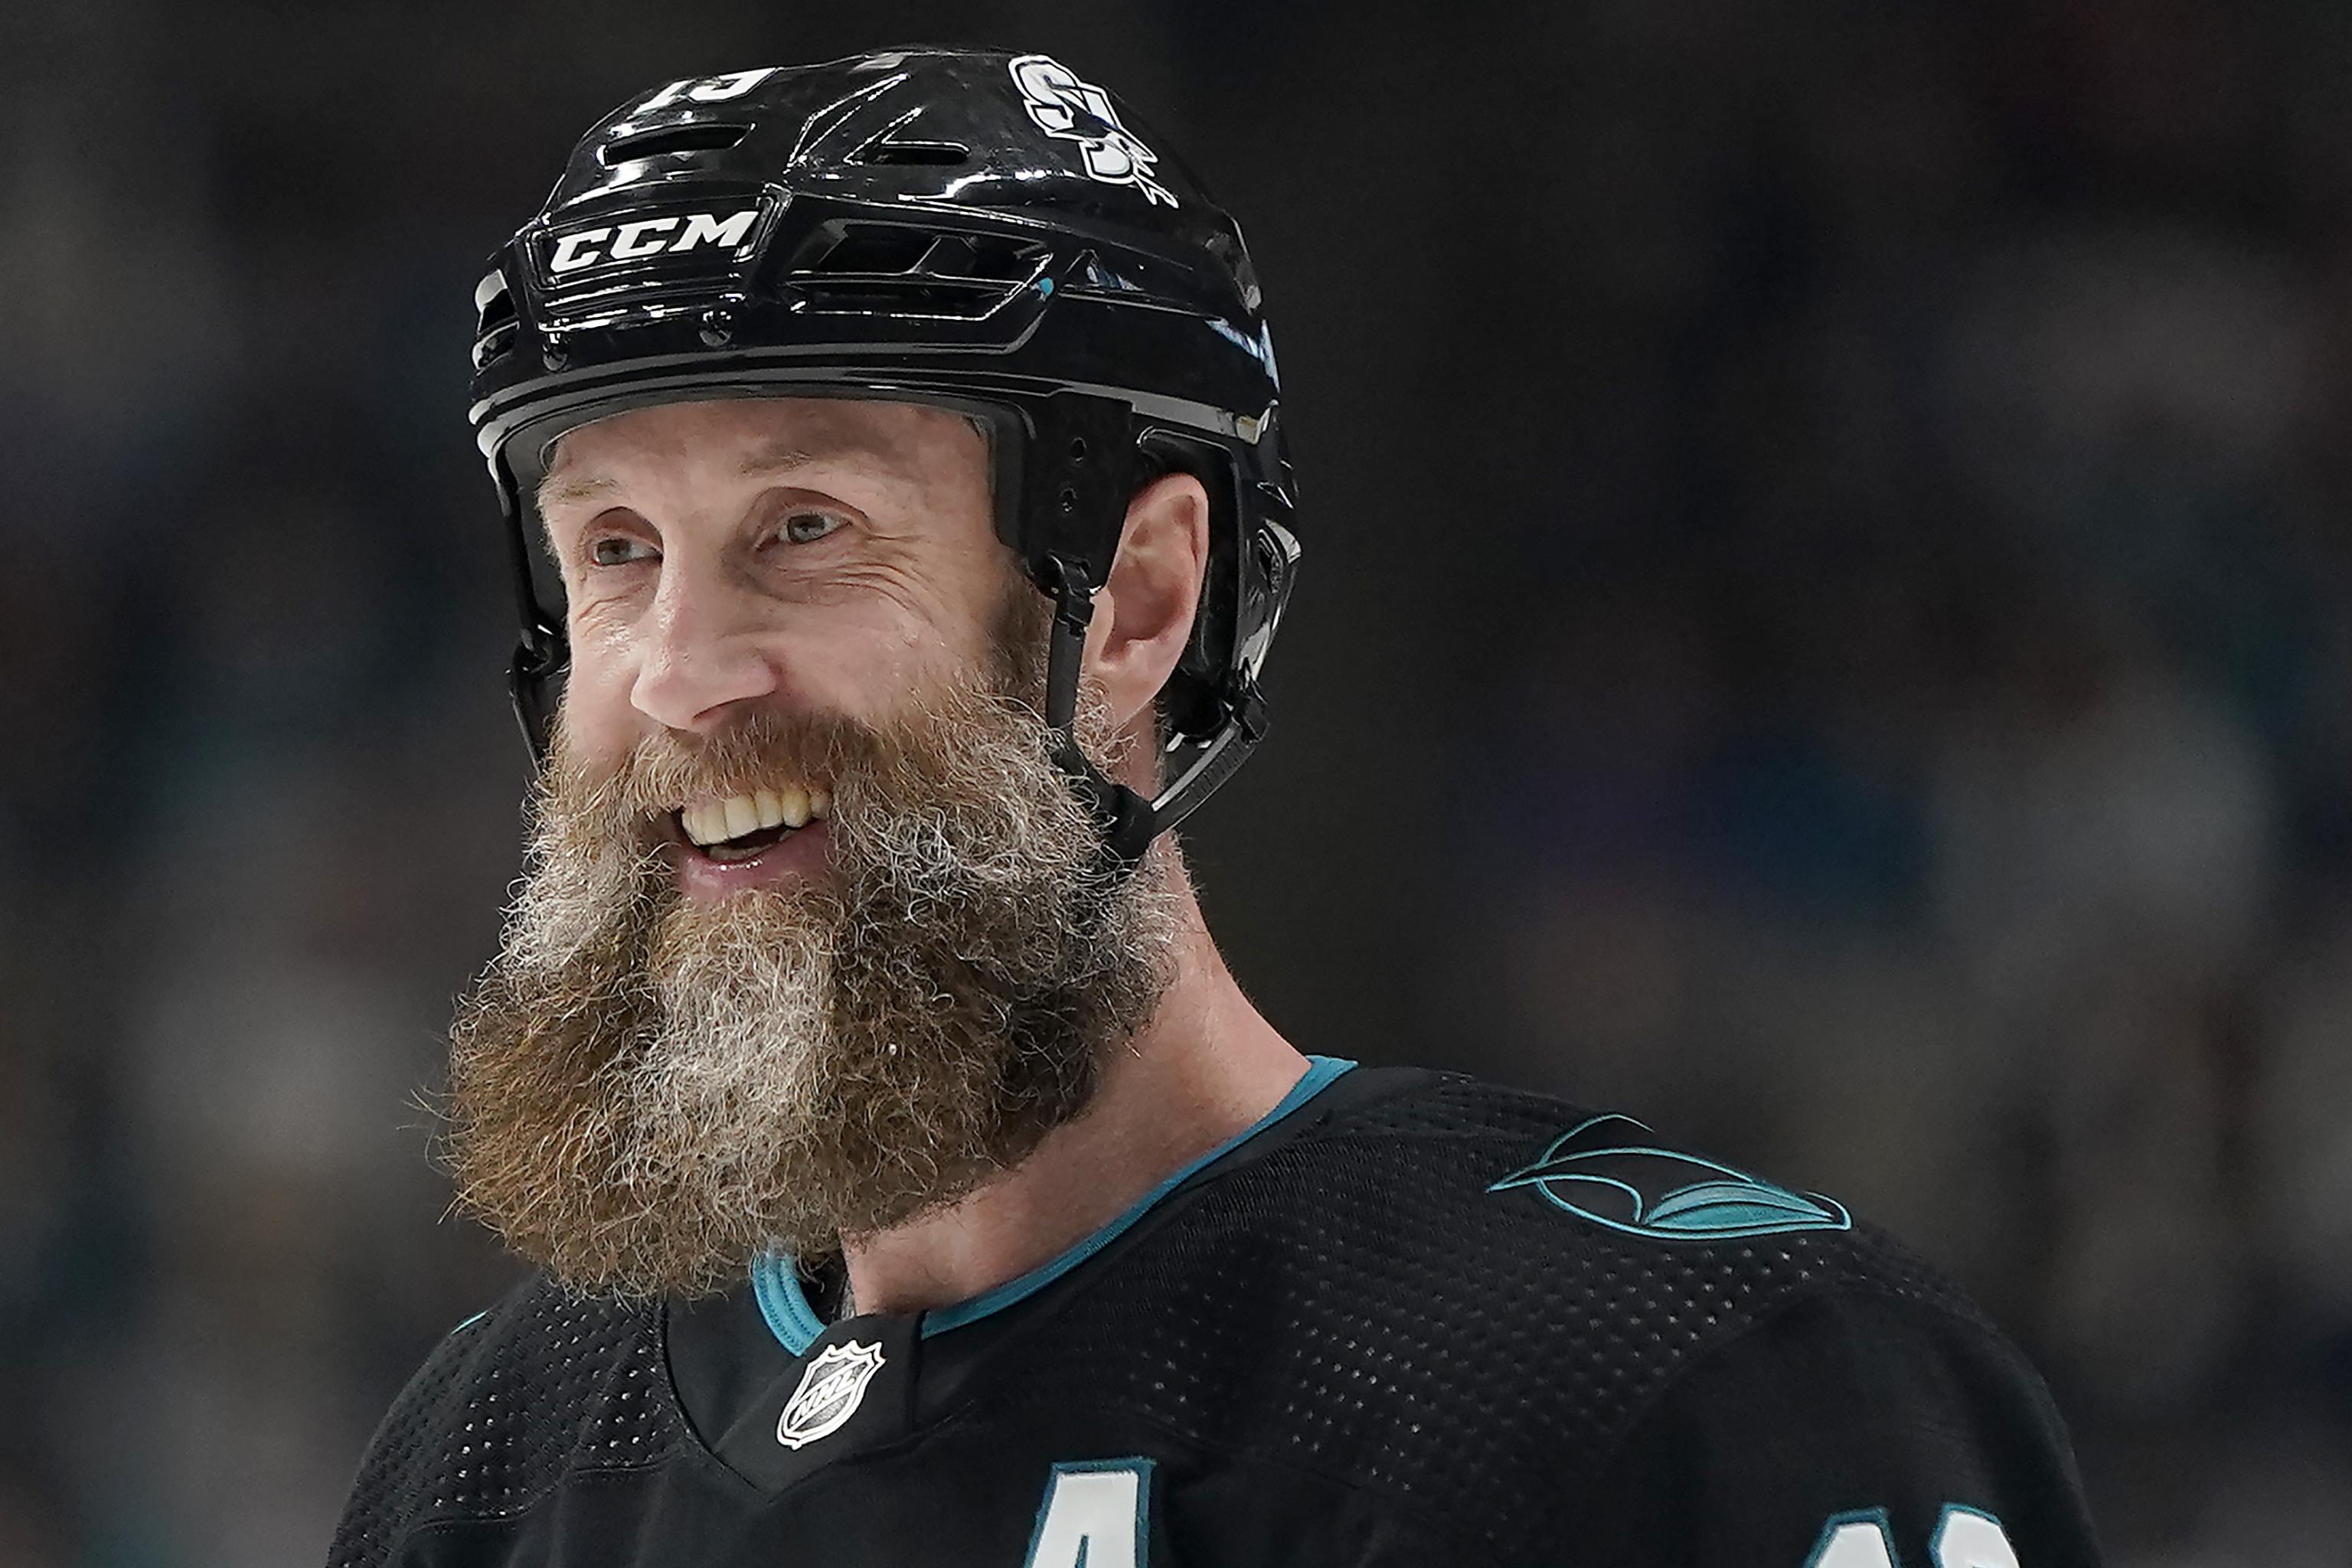 Former Sharks Star Joe Thornton Signs 1Year Contract with Maple Leafs